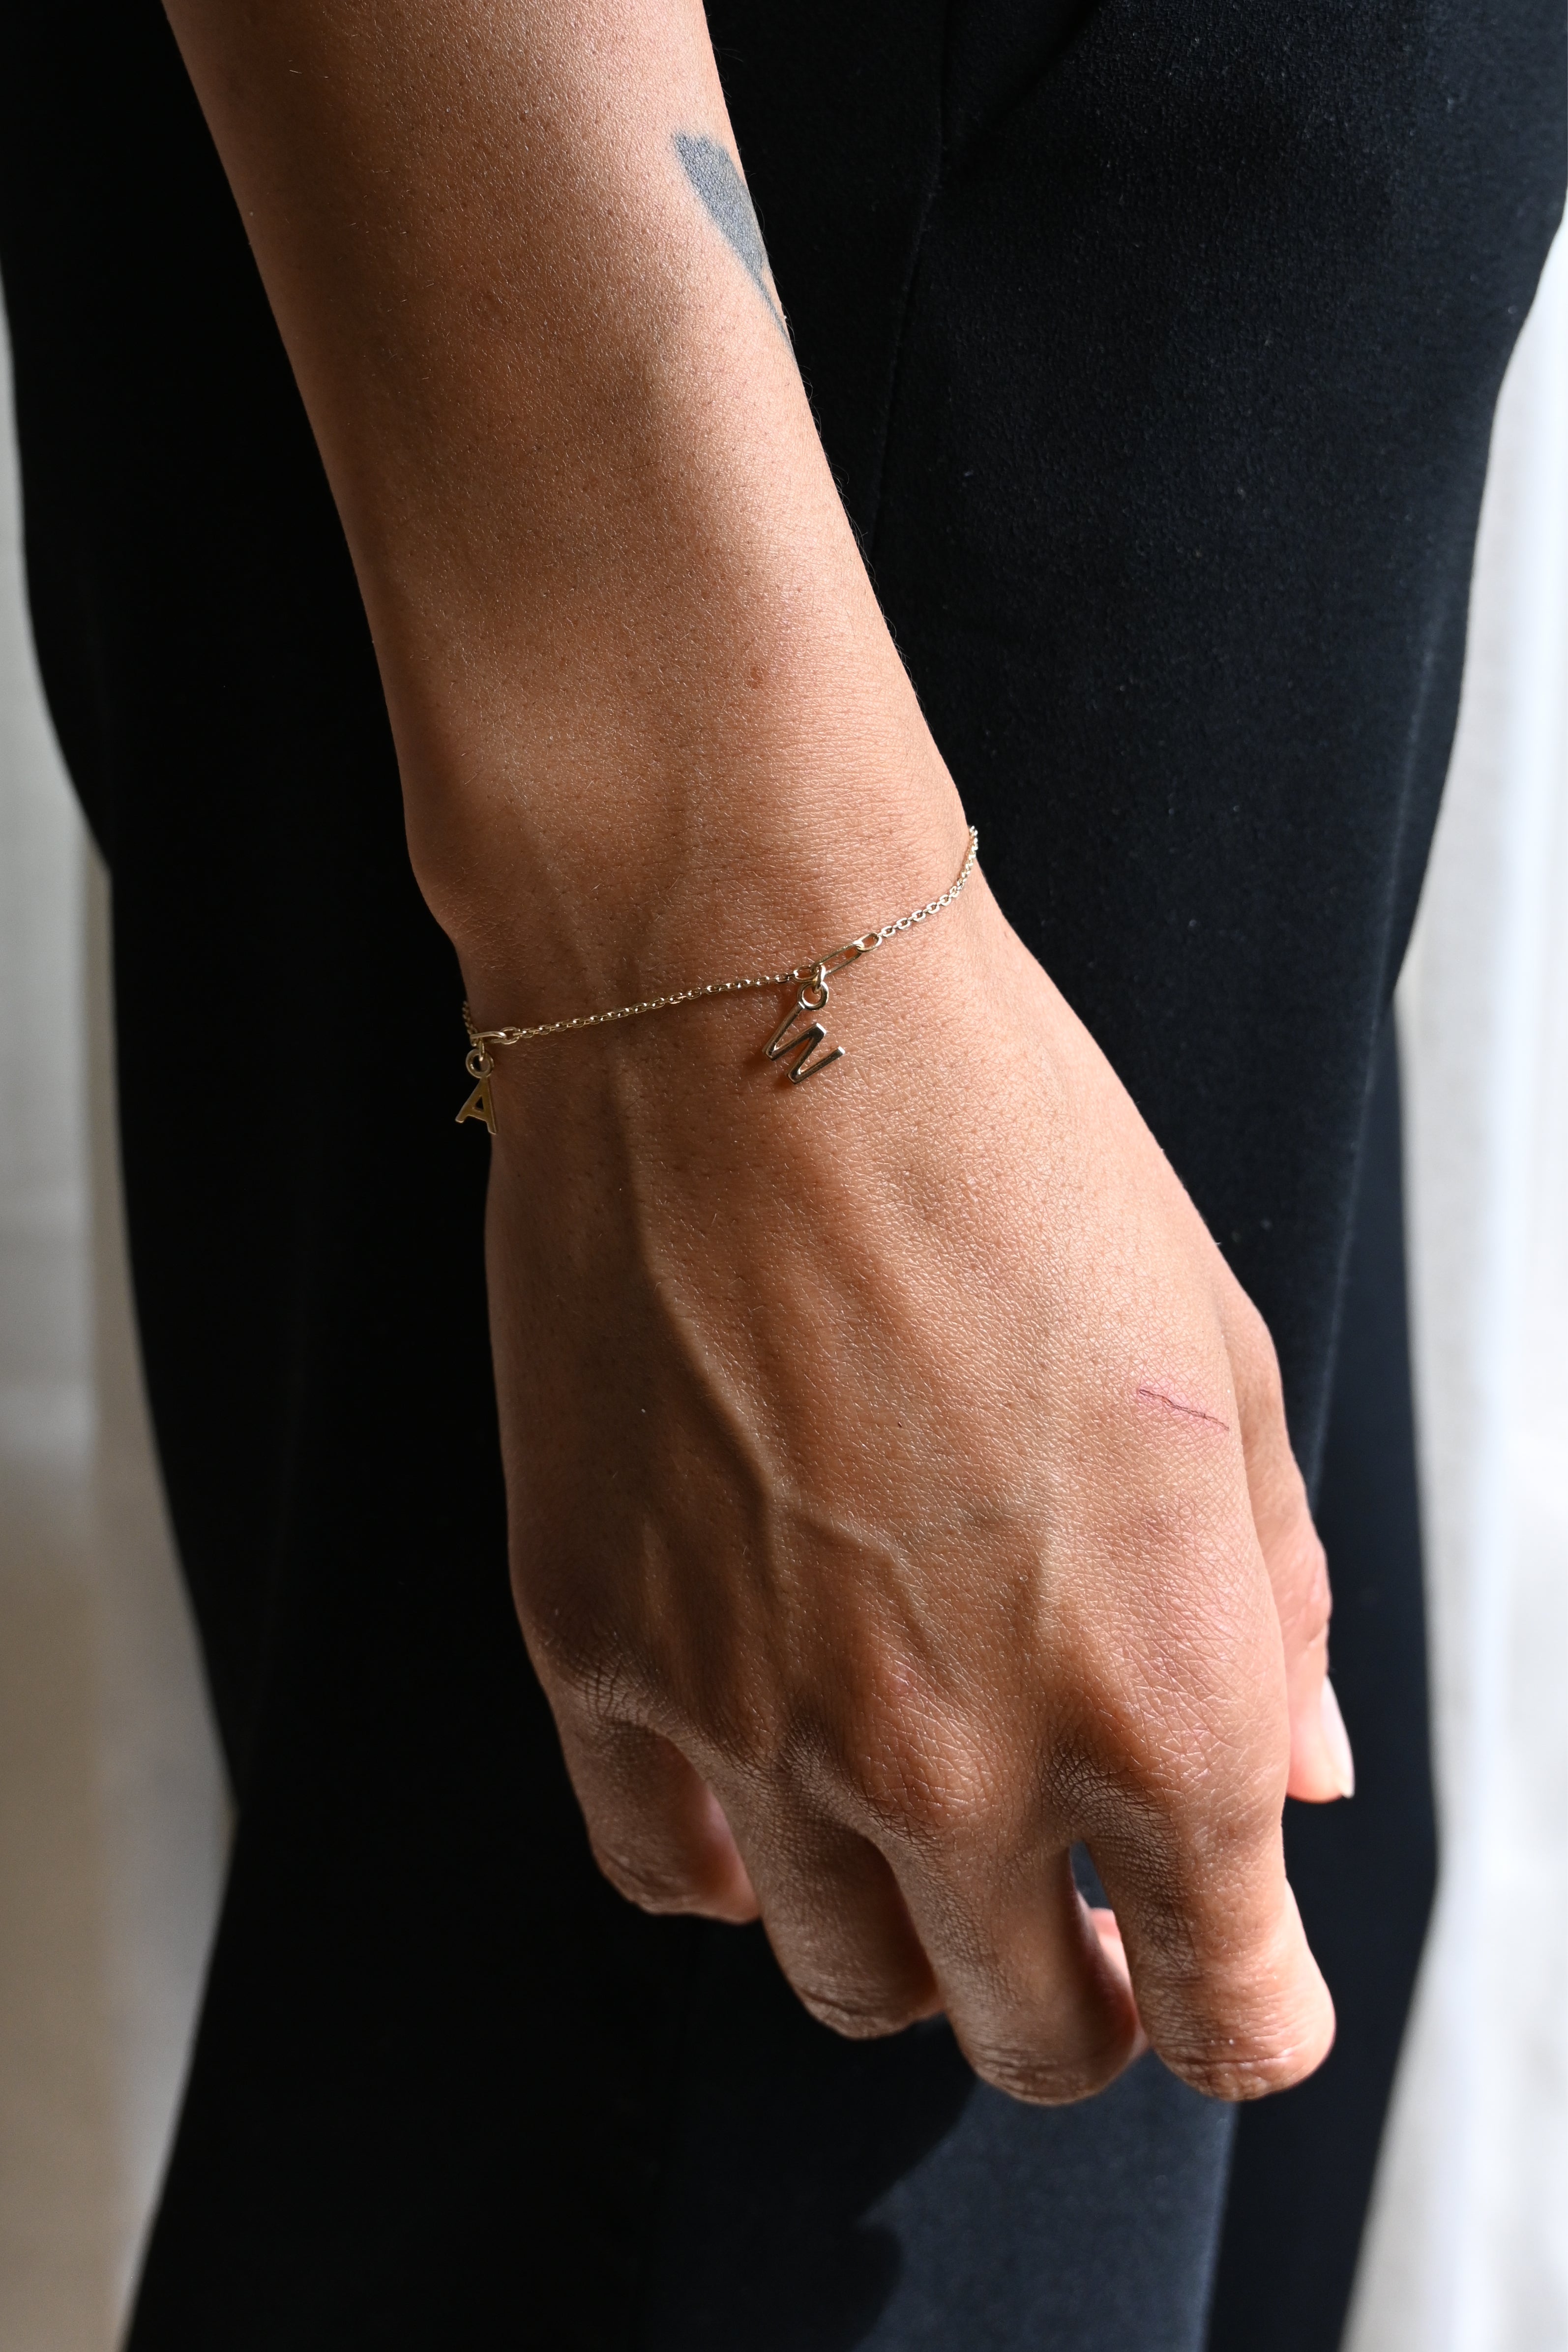 Image of models wrist, wearing a personalised gold bracelet with initial